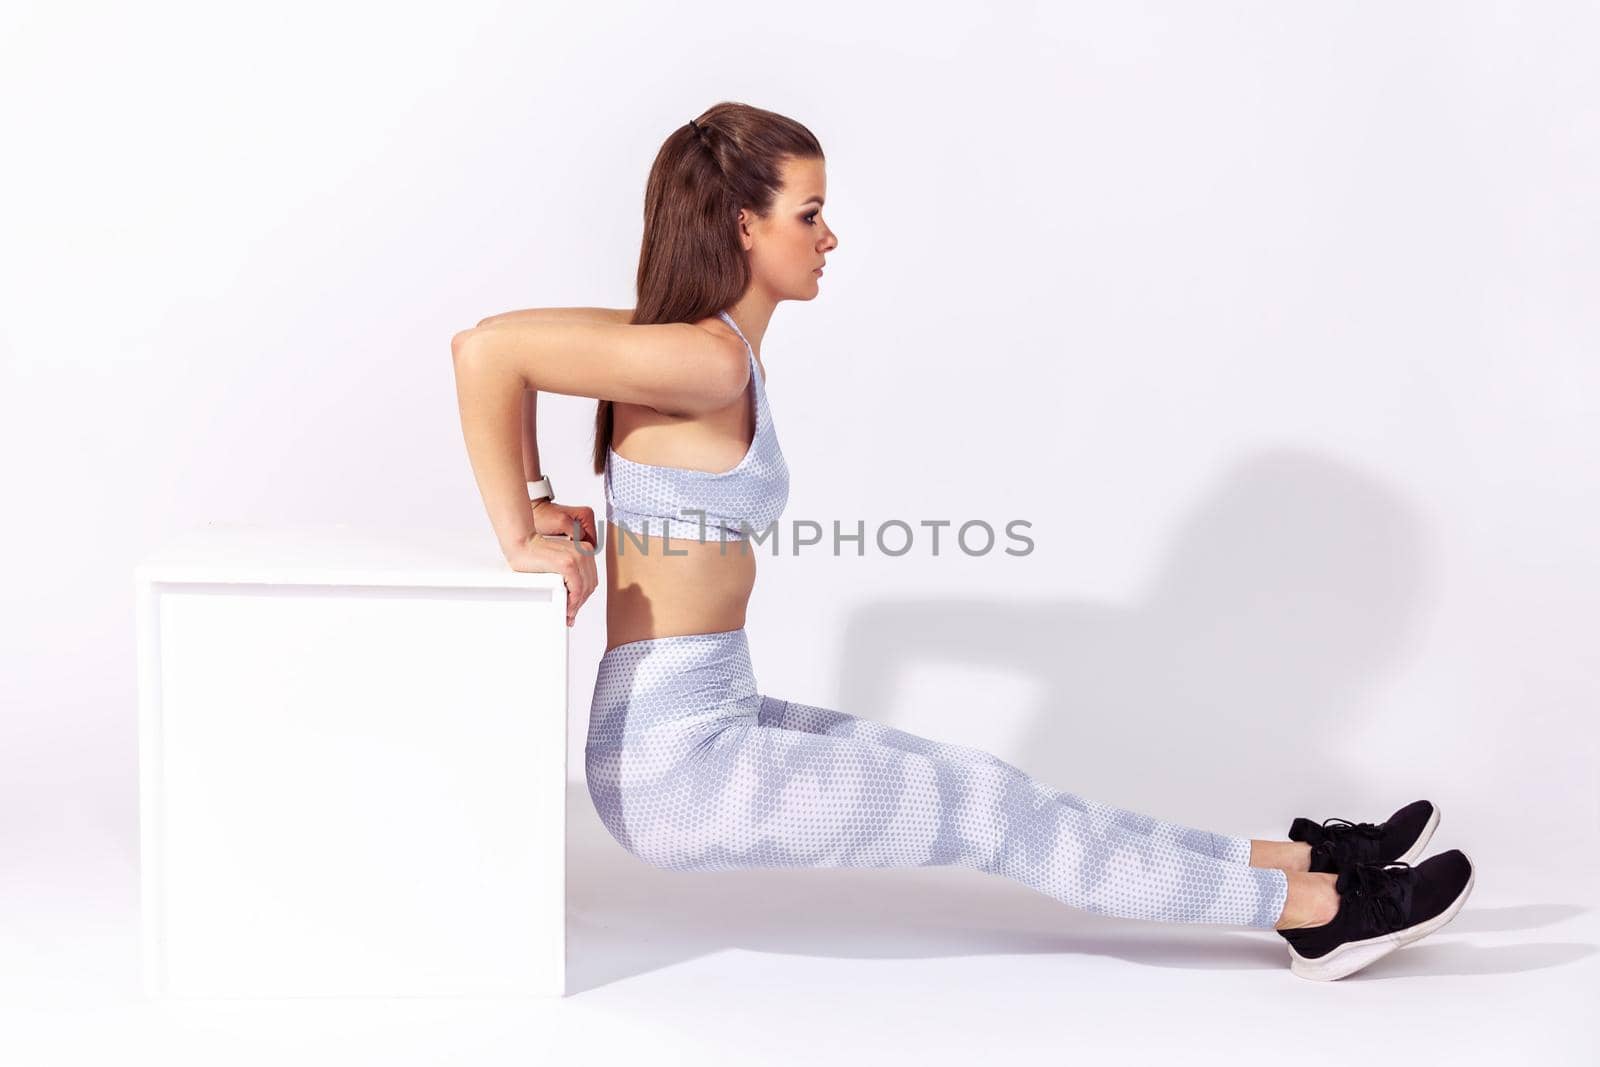 Full length side view assertive sportive woman in white top and tights pumping abs muscles doing sit ups, exercising with cube. Indoor studio shot isolated on gray background